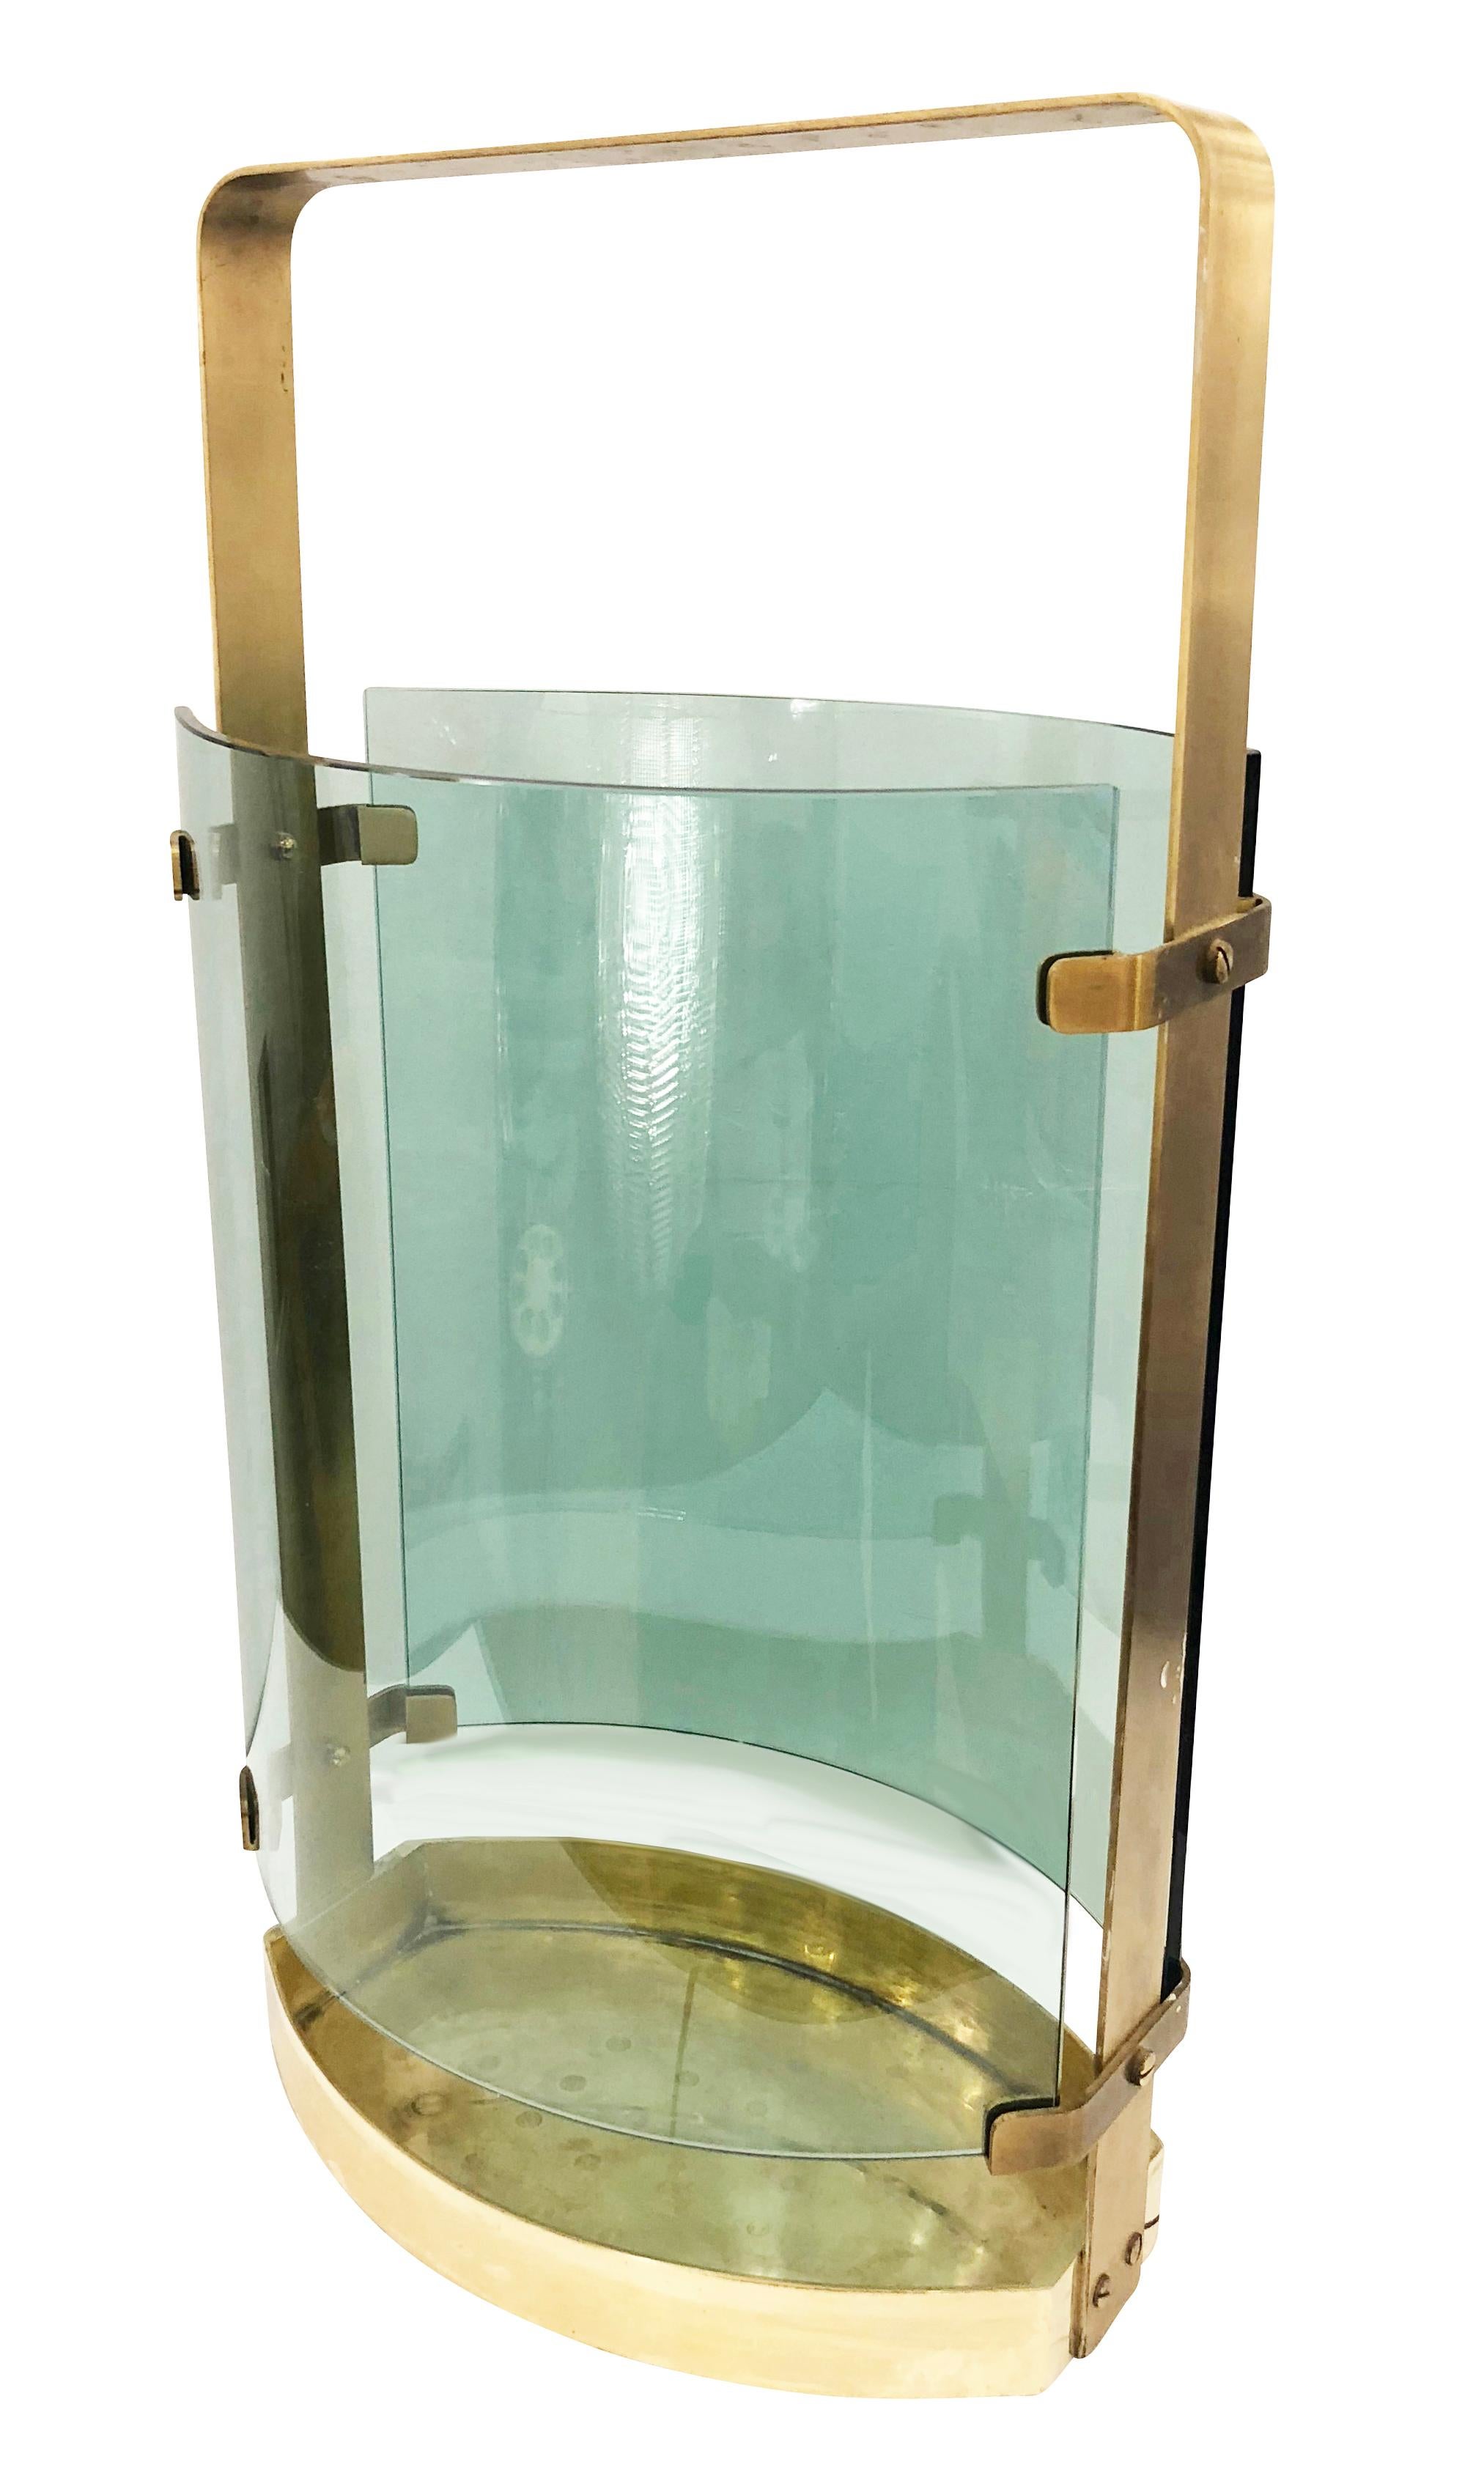 Beautiful 1960s umbrella stand by Fontana Arte with a brass frame and two curved aqua colored glasses.

Condition: Excellent vintage condition, minor wear consistent with age and use.
Measures: 
Width 14